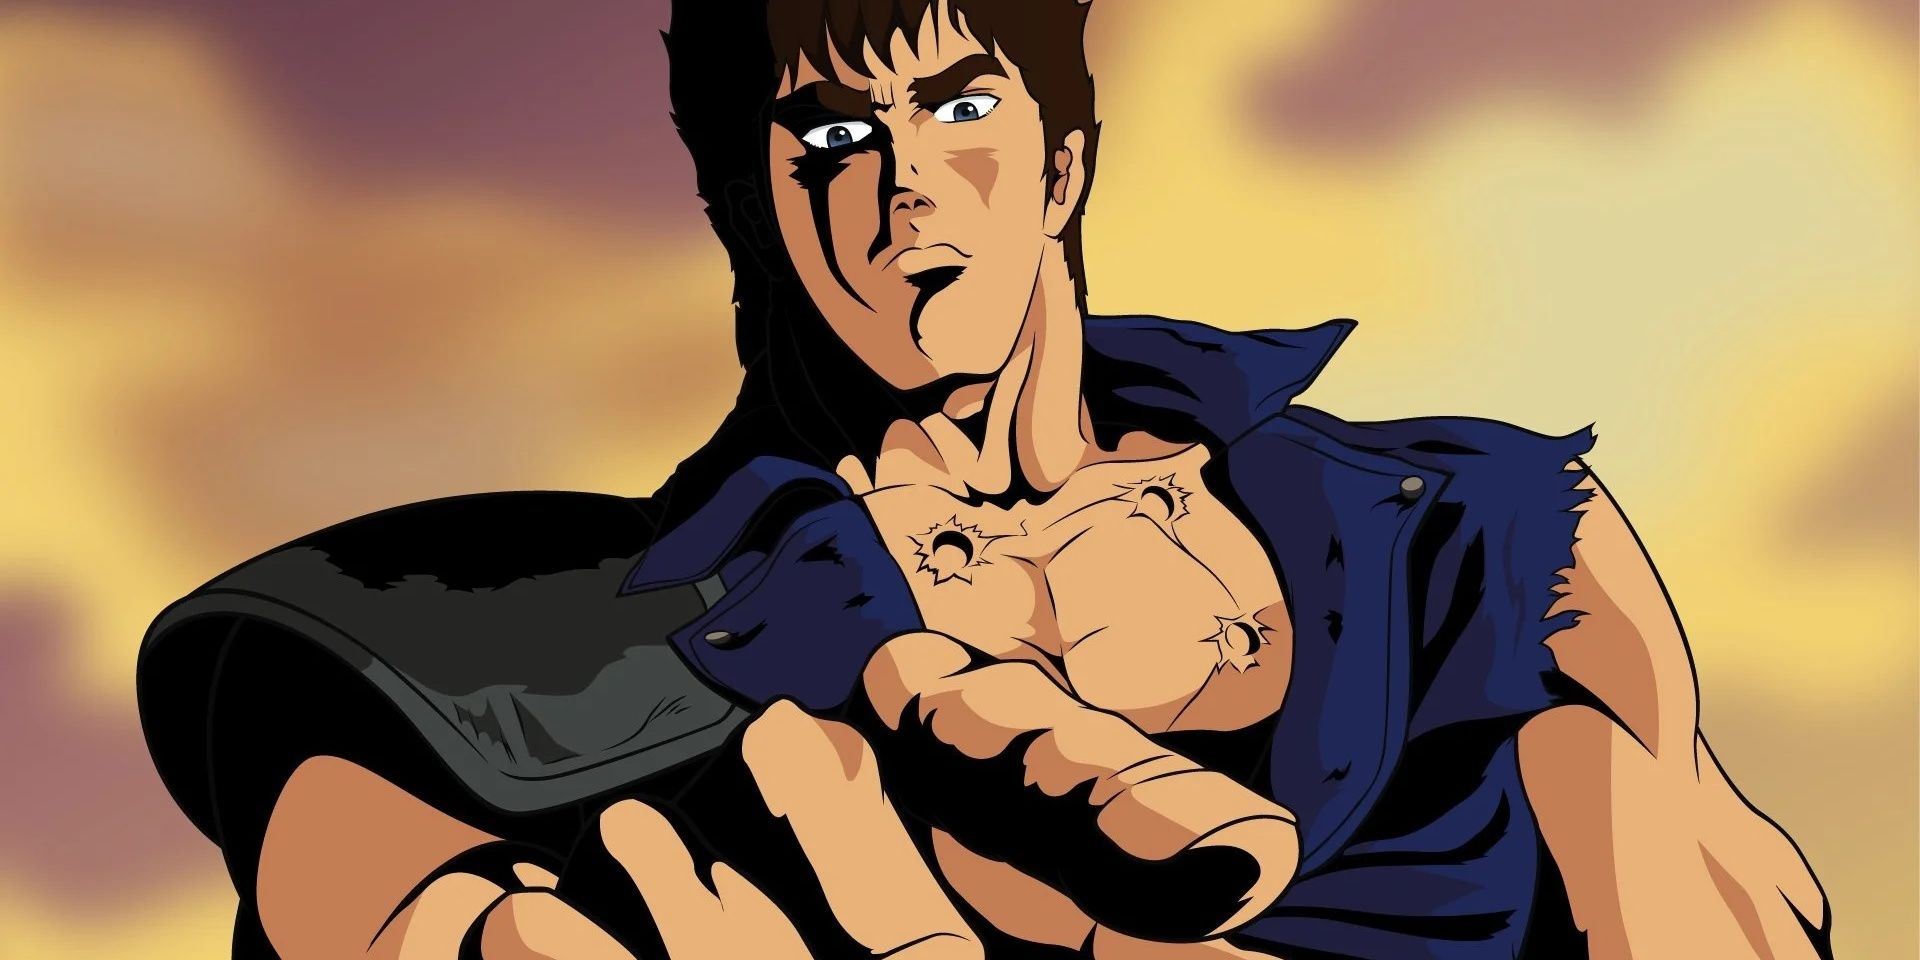 Kenshiro from Fist of the North Star pointing